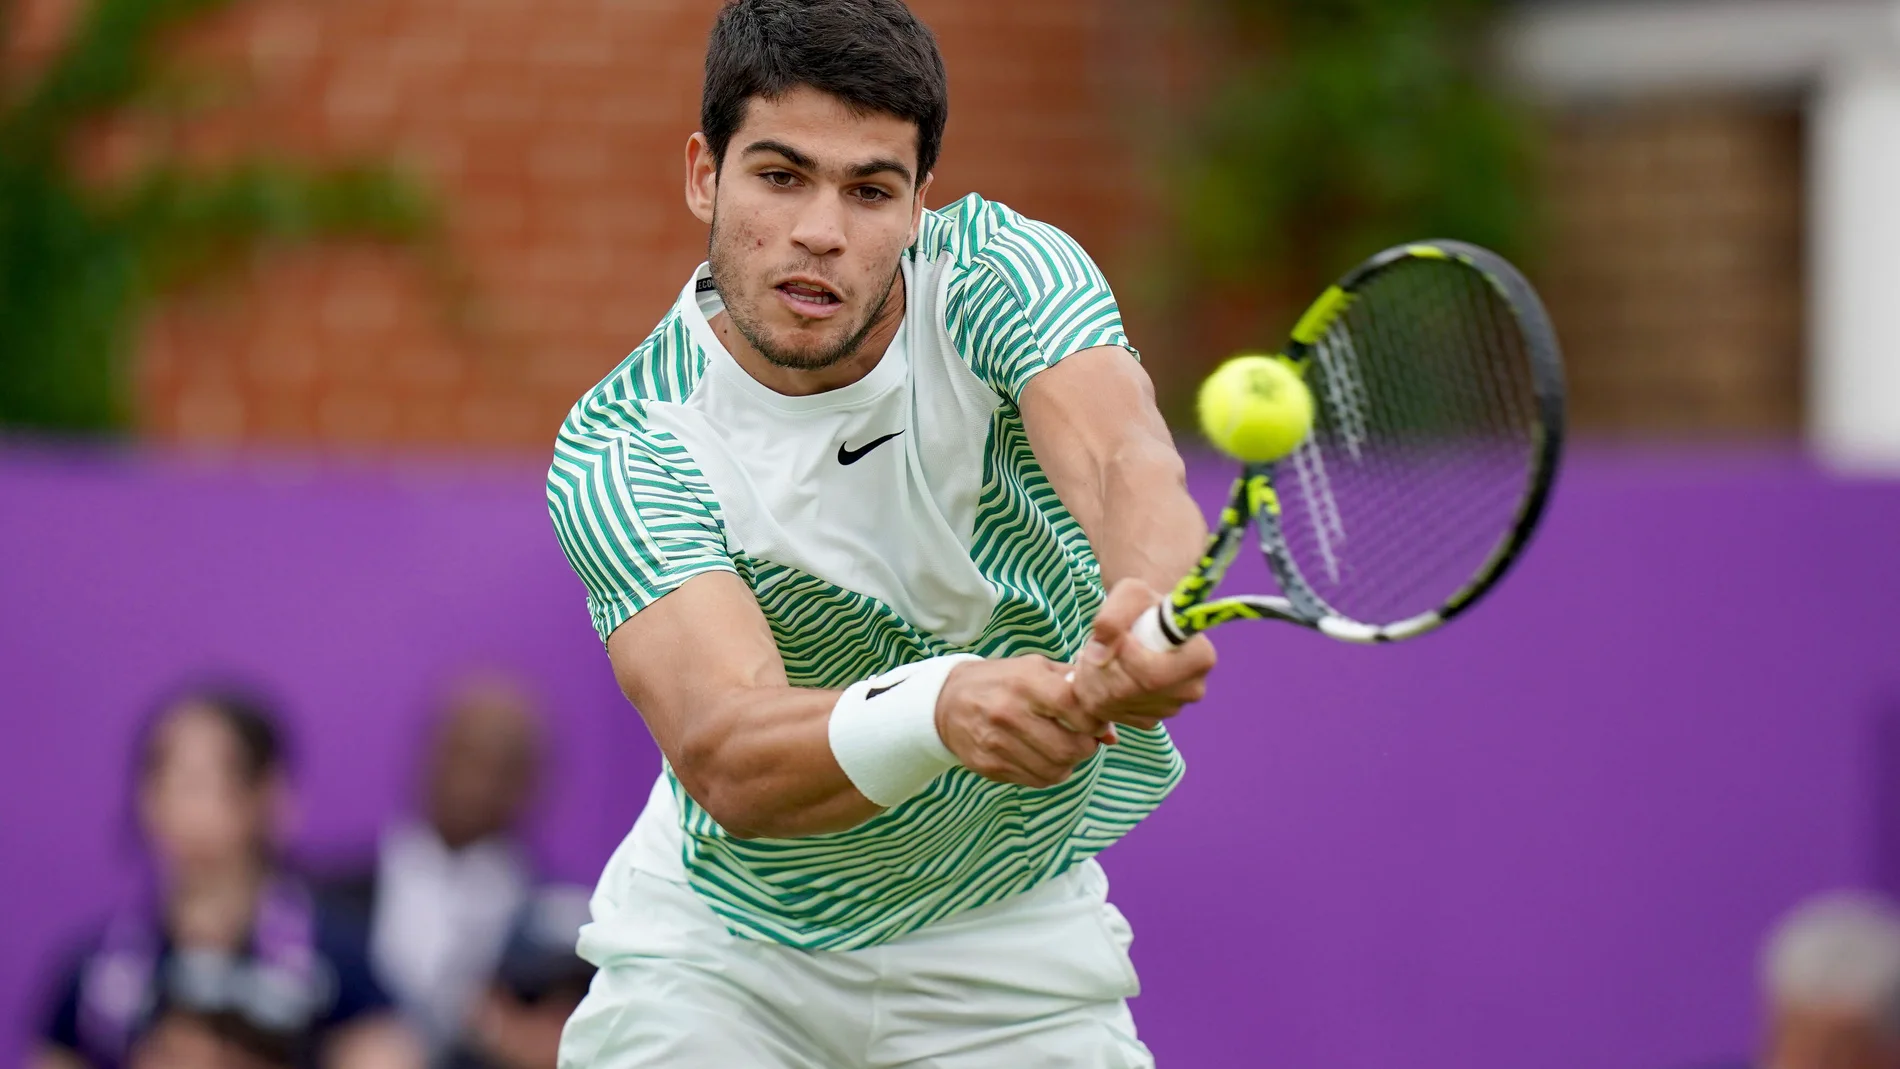 Spain's Carlos Alcaraz returns the ball to France's Arthur Fils during the Men's Singles Lucky Loser Qualifying match on day two of the 2023 cinch Championships at The Queen's Club, London, Tuesday June 20, 2023. (Adam Davy/PA via AP)